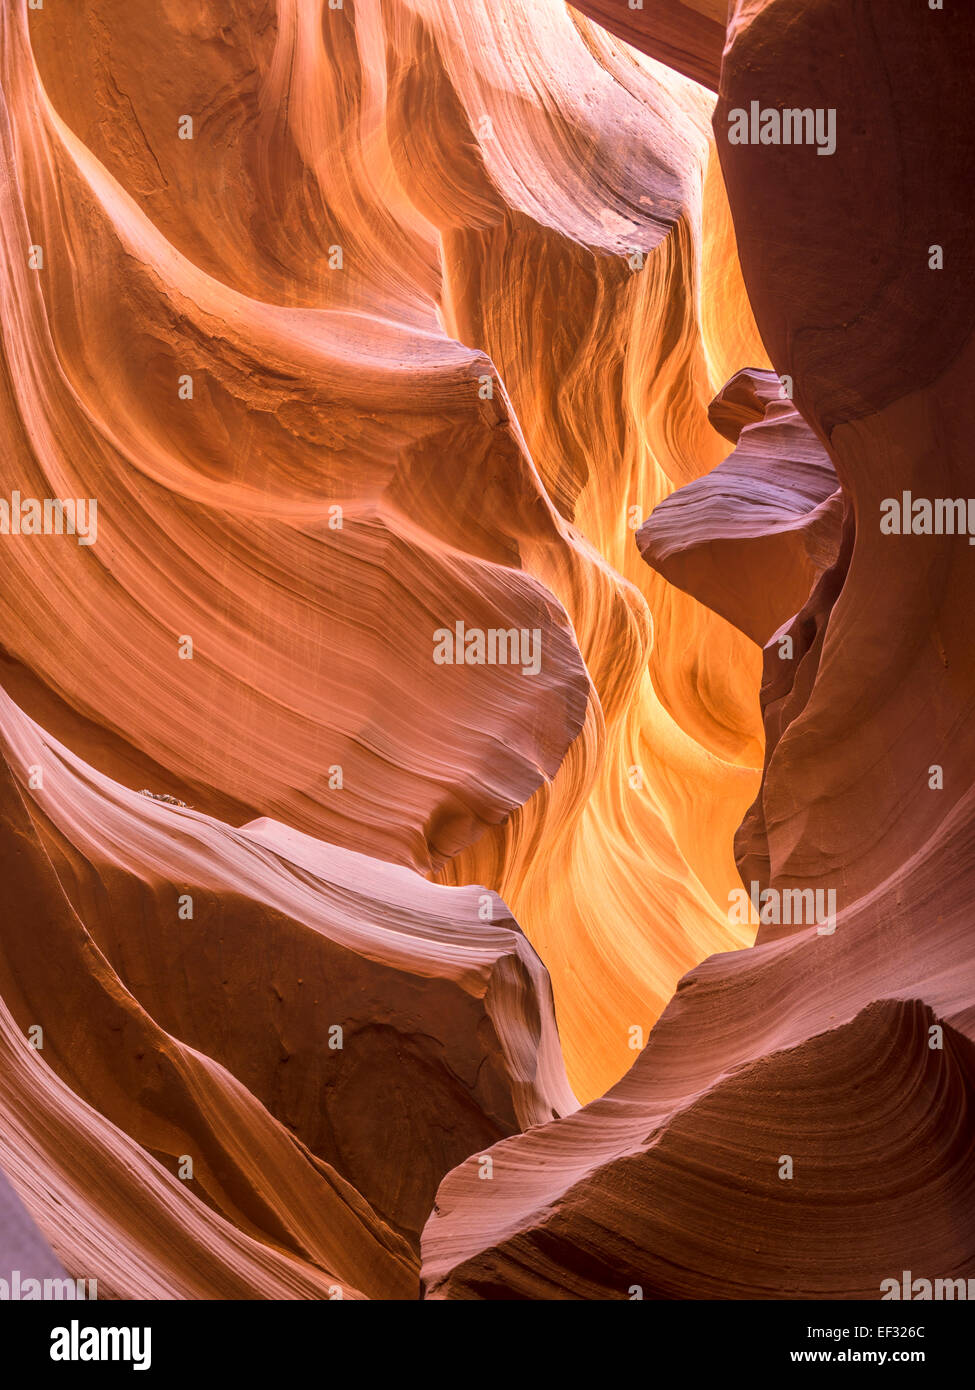 Lower Antelope Canyon, Page, Arizona, united states Banque D'Images